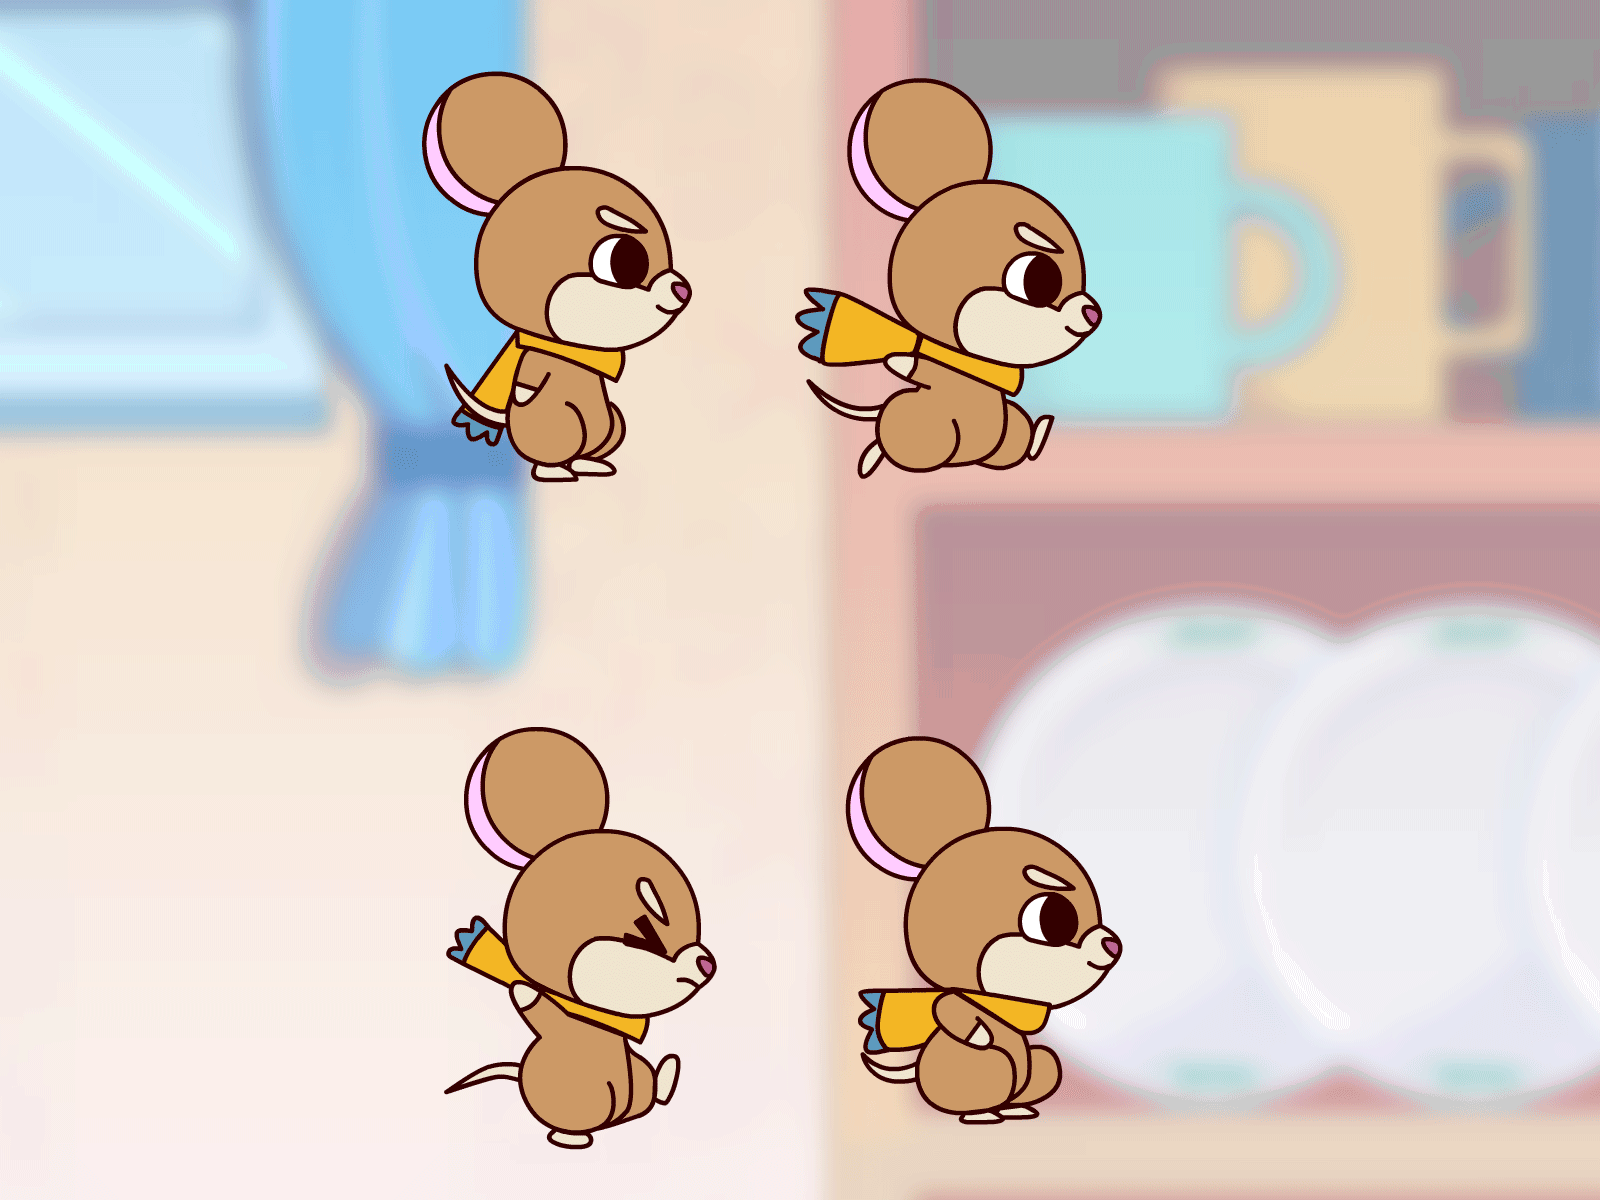 Mouse animation 2d animation character design children educational educative game game game design illustration kids